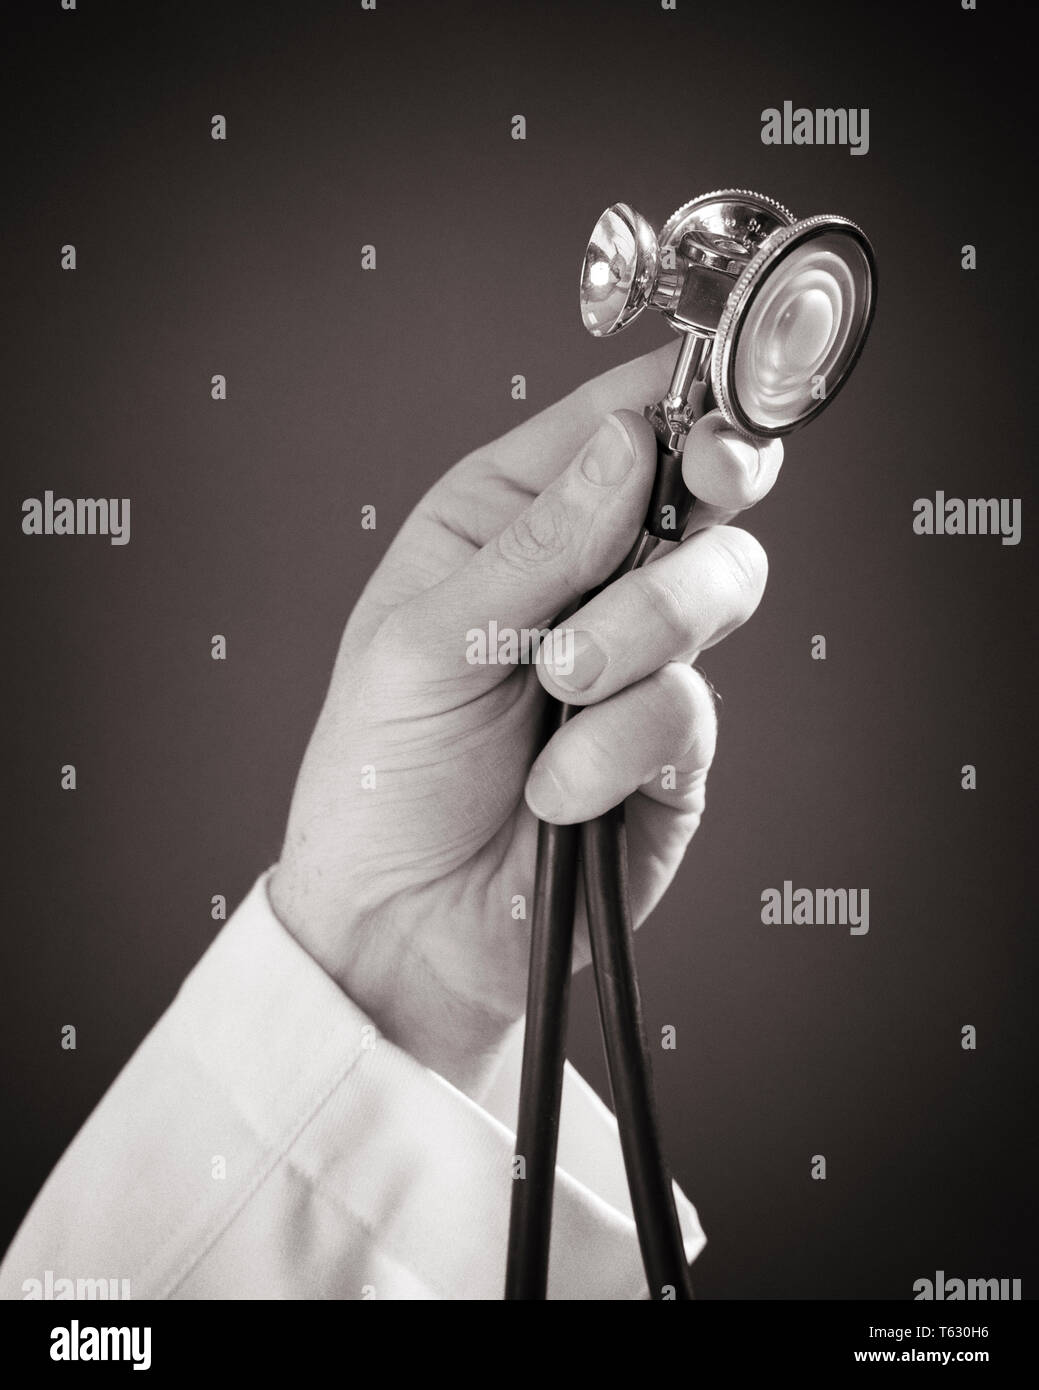 landlady use Approximation 1960s male medical doctor's hand holding a stethoscope - s15205 HAR001 HARS  DIAGNOSIS PHYSICIANS INNOVATION HEALTH CARE IMPAIRMENT OCCUPATIONS  TREATMENT CONCEPT HEALER CONCEPTUAL STILL LIFE PHYSICIAN PRACTITIONER  SYMBOLIC CONCEPTS DEVICE PROFESSIONALS ...